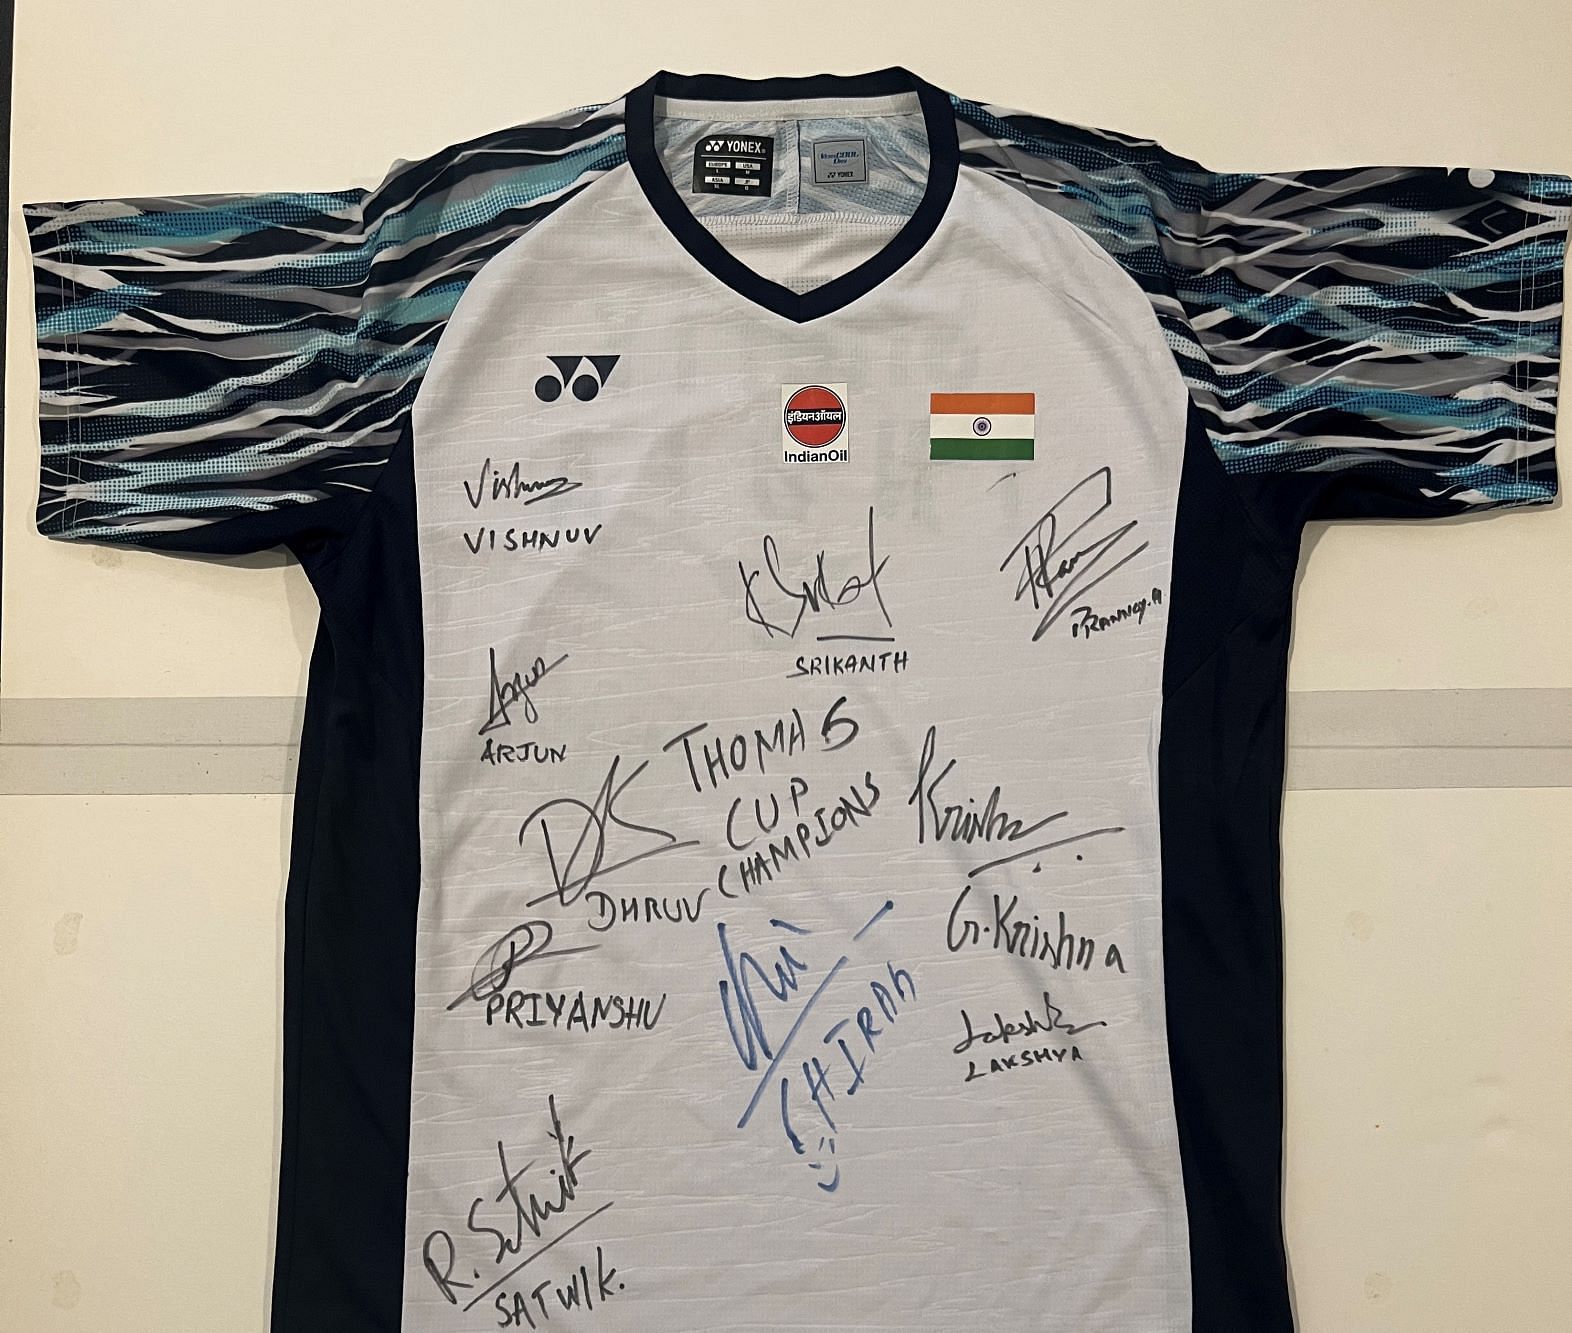 Live auction of Thomas Cup winning star Chirag Shettys T-shirt for charity on May 28